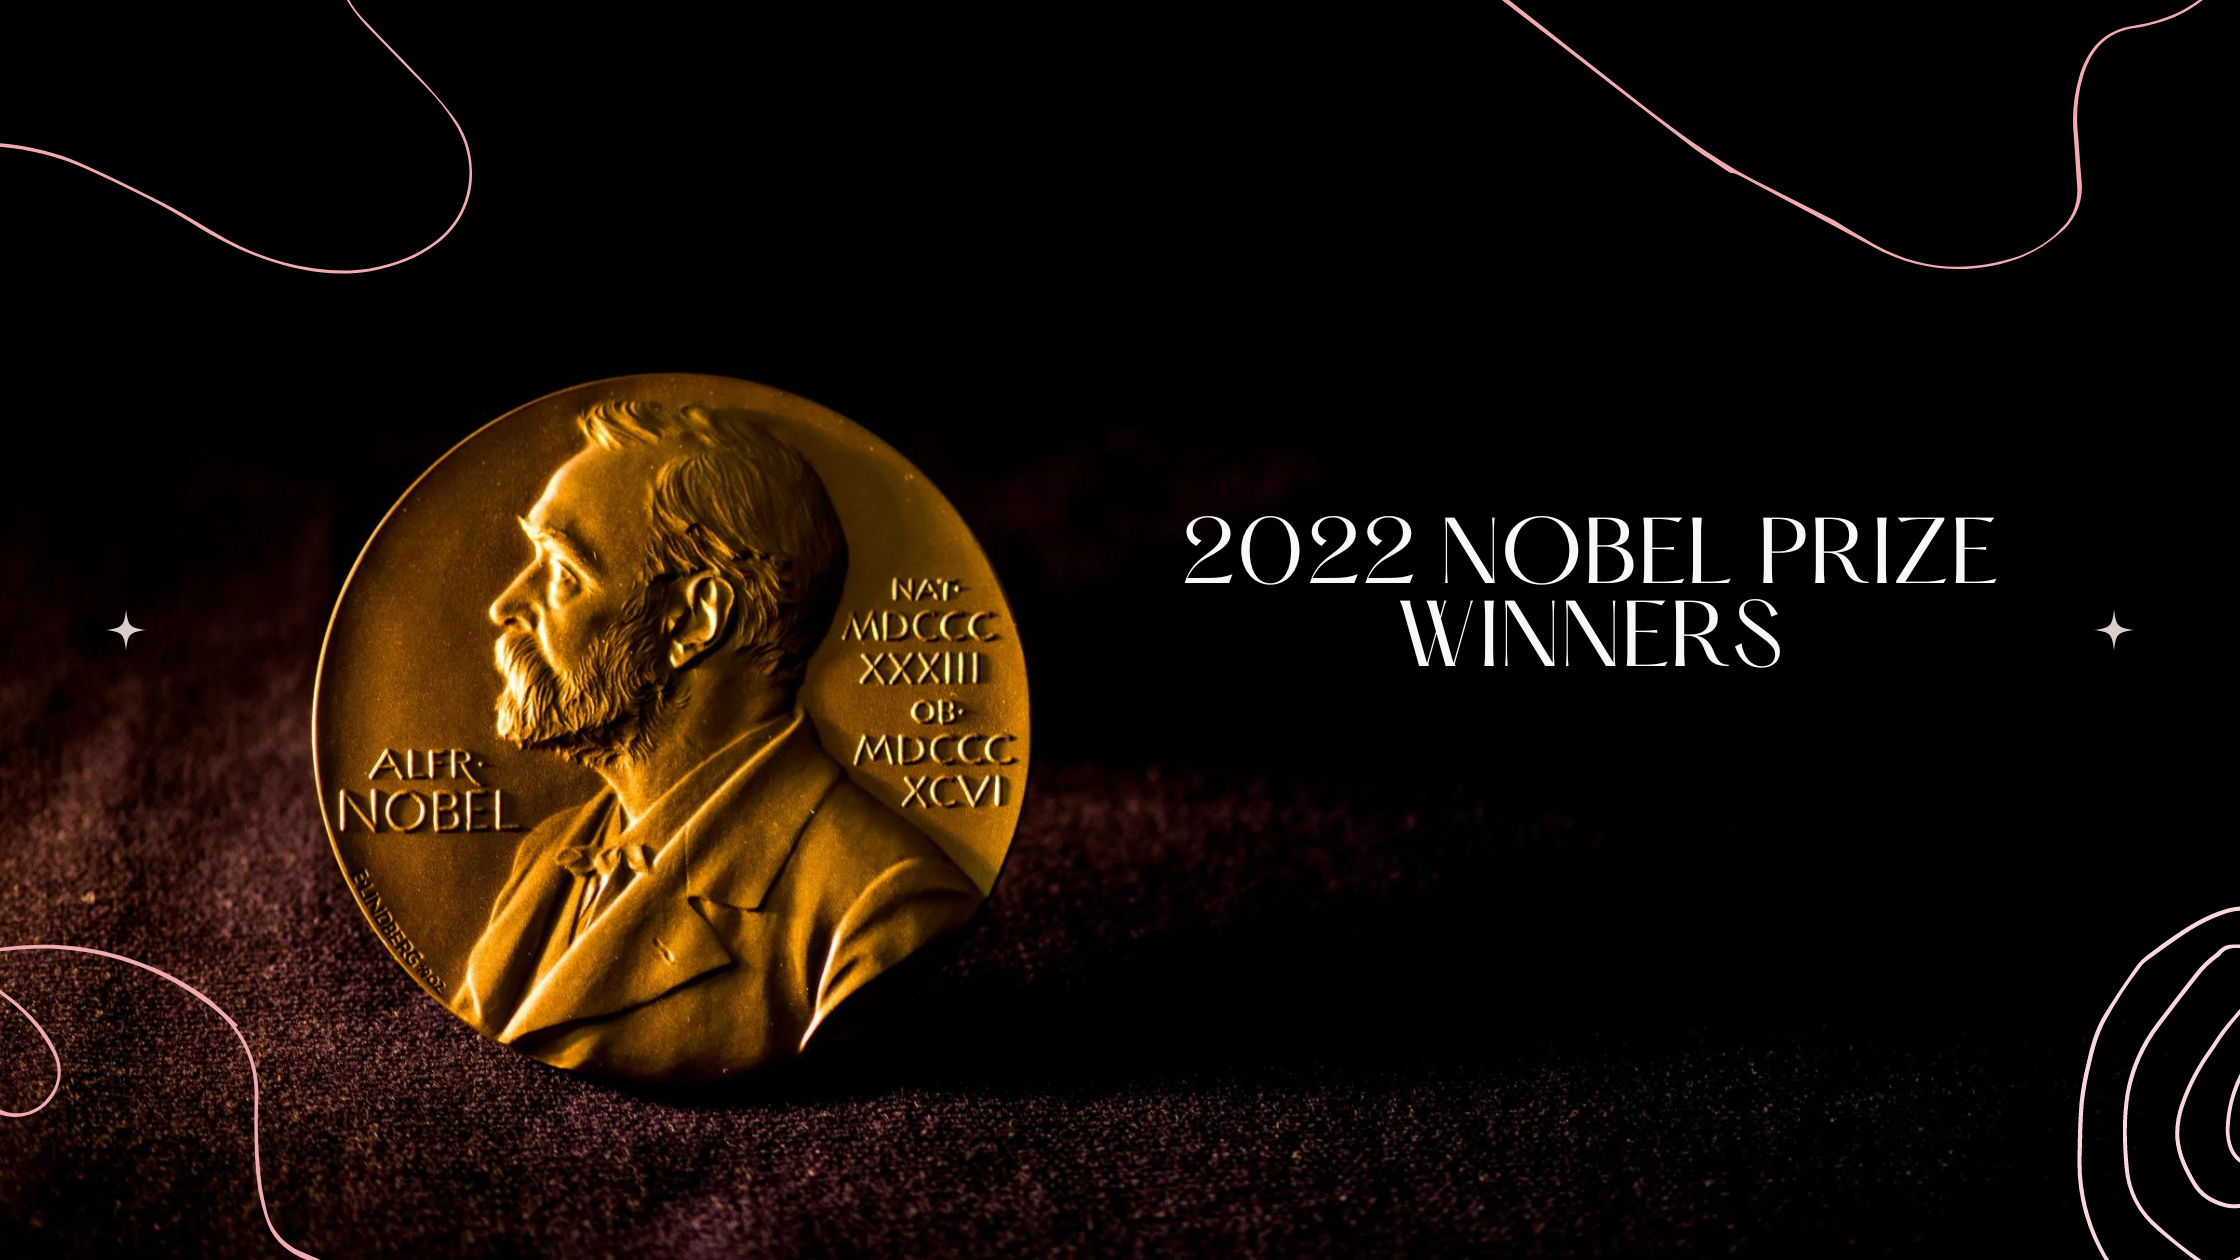 Who Are the 2022 Nobel Prize Winners? Meet the Recipients So Far.